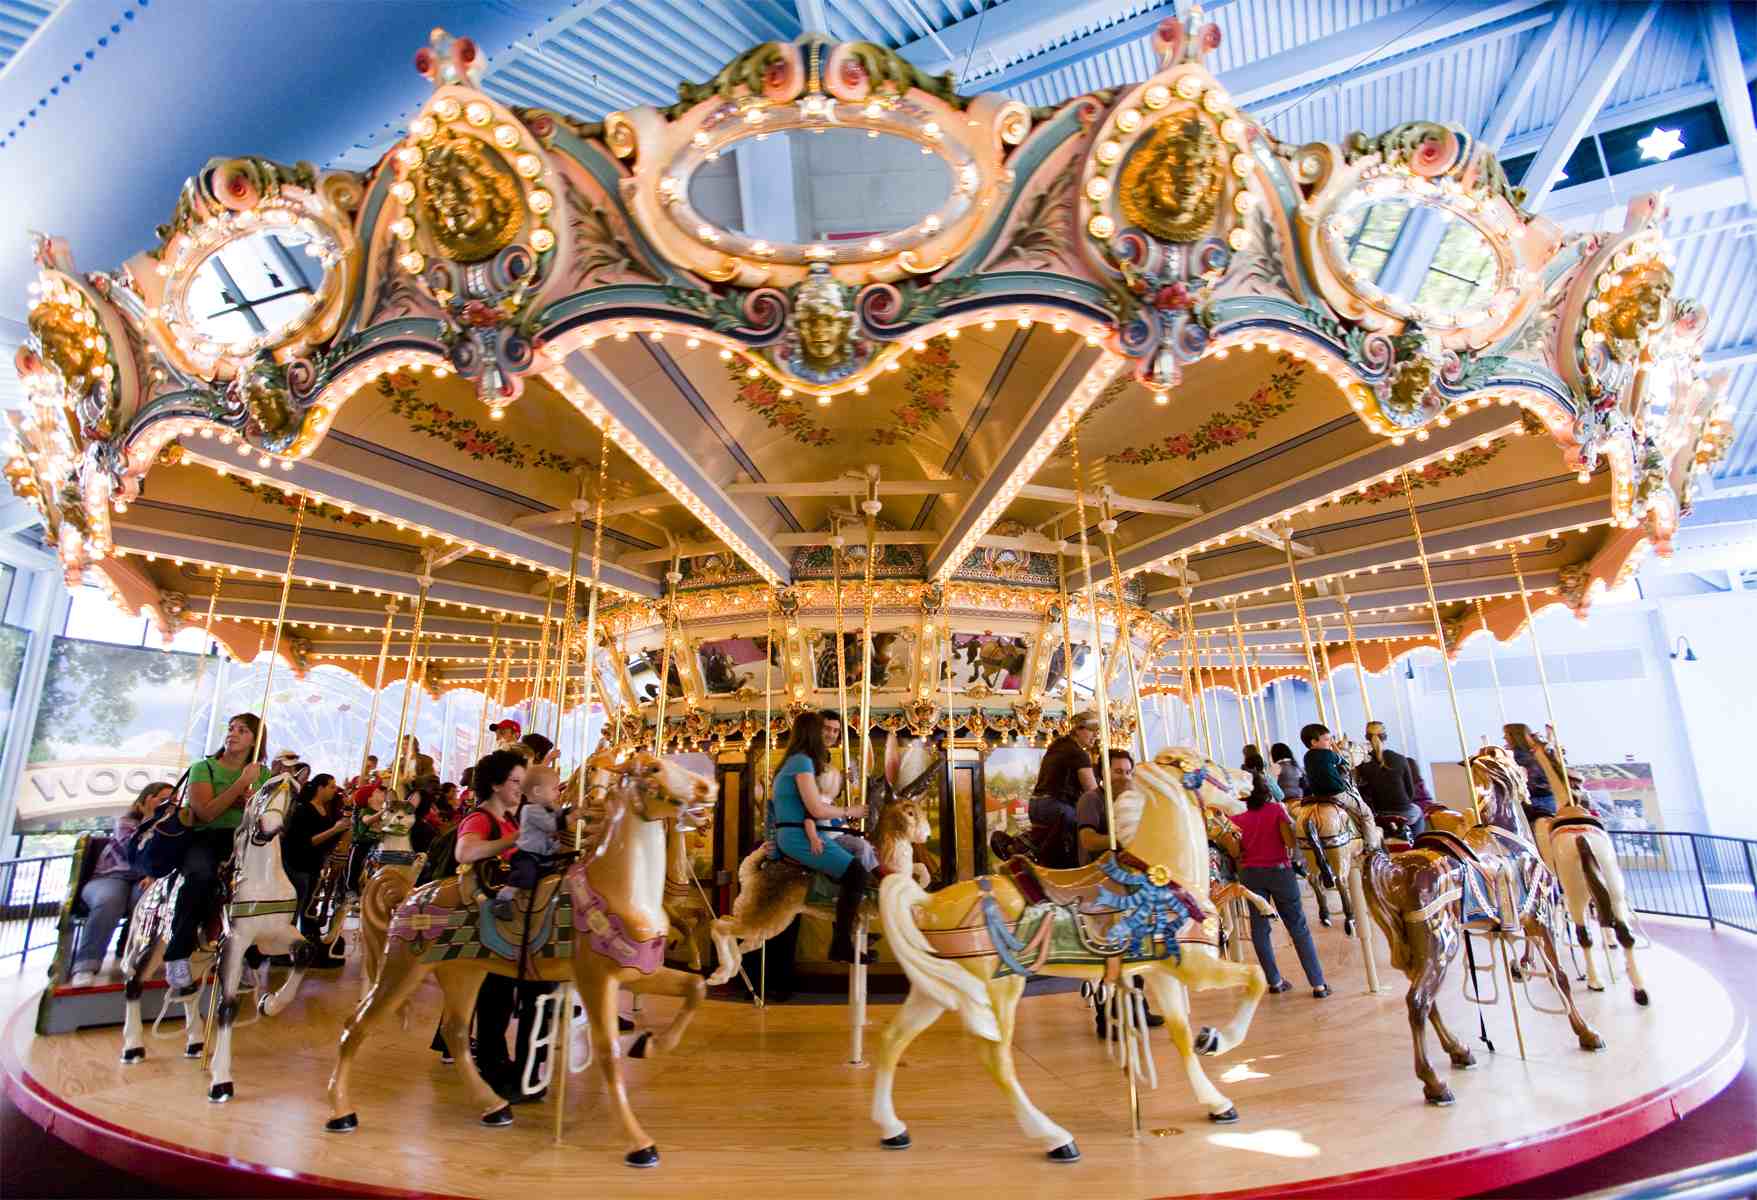 Carousel Wallpapers High Quality Download Free HD Wallpapers Download Free Images Wallpaper [wallpaper981.blogspot.com]